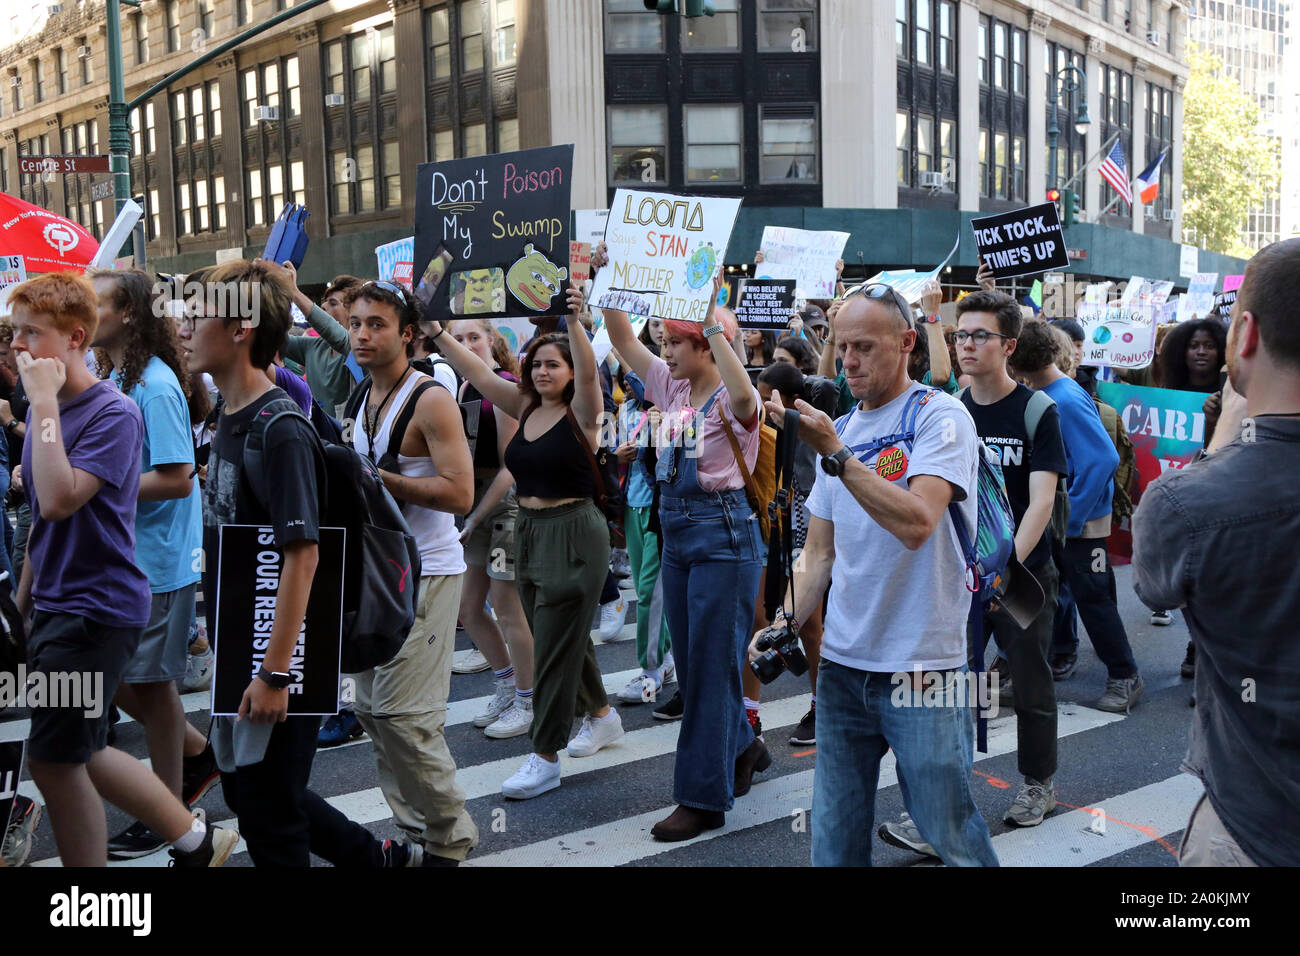 New York City, New York, USA. 20th Sep, 2019. Large crowd of students numbering in the tens of thousands joined others climate concern activists globally on 20 Sep, 2019, in Foley Square, Manhattan for a rally and march to Battery Park in Lower Manhattan in a Climate Strike inspired by Swedish climate activist Greta Thunberg, who addressed the large gathering. Credit: G. Ronald Lopez/ZUMA Wire/Alamy Live News Stock Photo